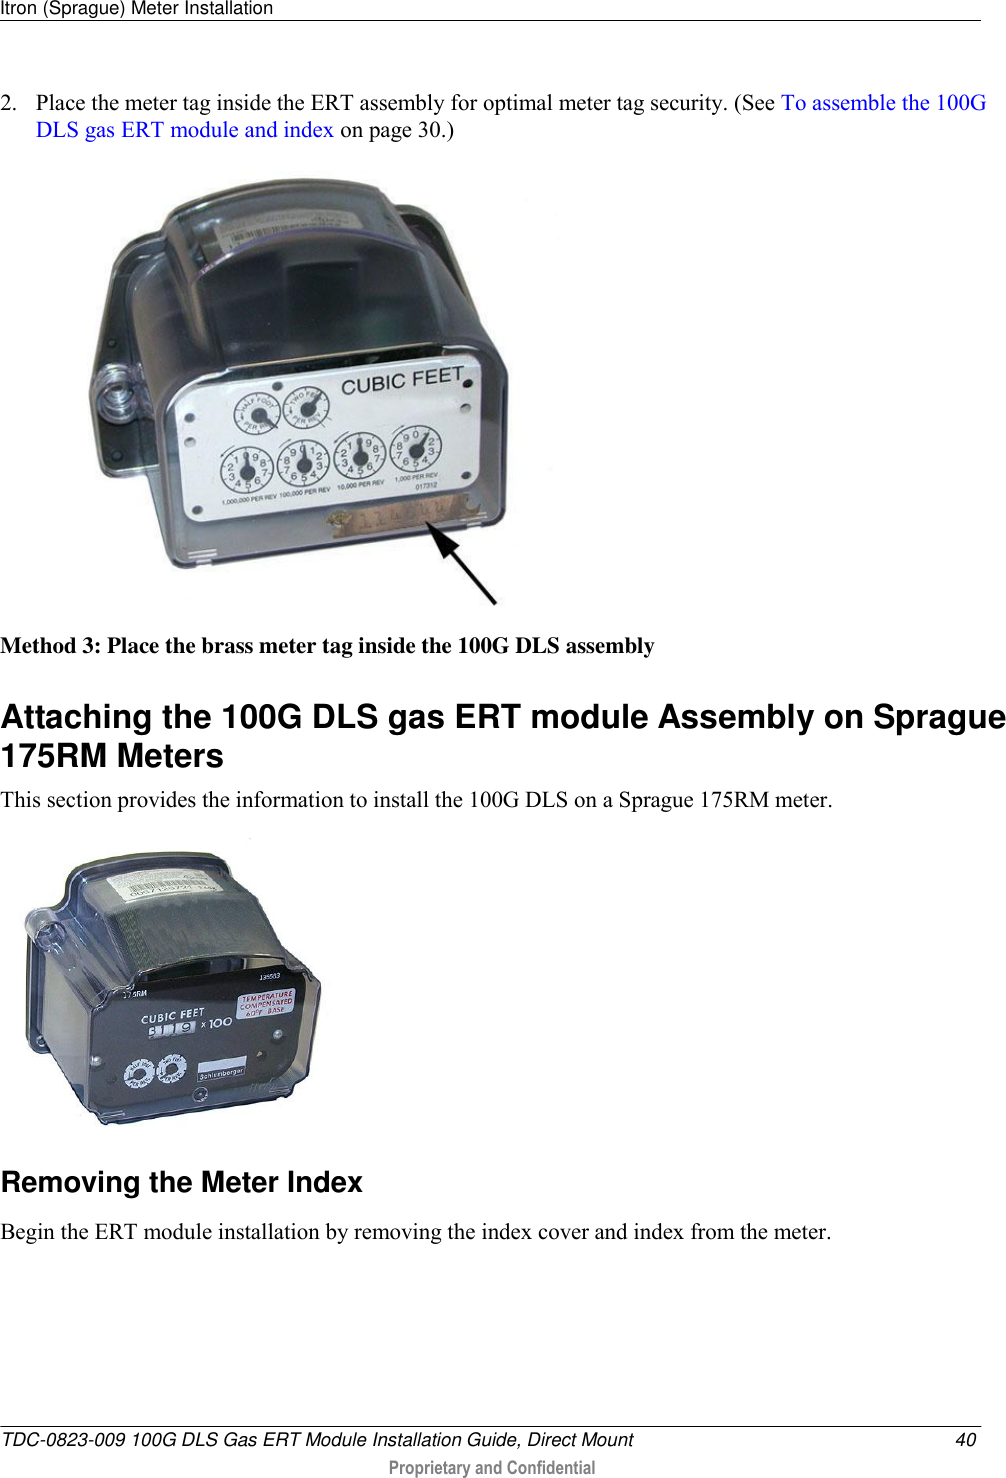 Itron (Sprague) Meter Installation   TDC-0823-009 100G DLS Gas ERT Module Installation Guide, Direct Mount  40  Proprietary and Confidential    2. Place the meter tag inside the ERT assembly for optimal meter tag security. (See To assemble the 100G DLS gas ERT module and index on page 30.)  Method 3: Place the brass meter tag inside the 100G DLS assembly  Attaching the 100G DLS gas ERT module Assembly on Sprague 175RM Meters This section provides the information to install the 100G DLS on a Sprague 175RM meter.   Removing the Meter Index Begin the ERT module installation by removing the index cover and index from the meter.  